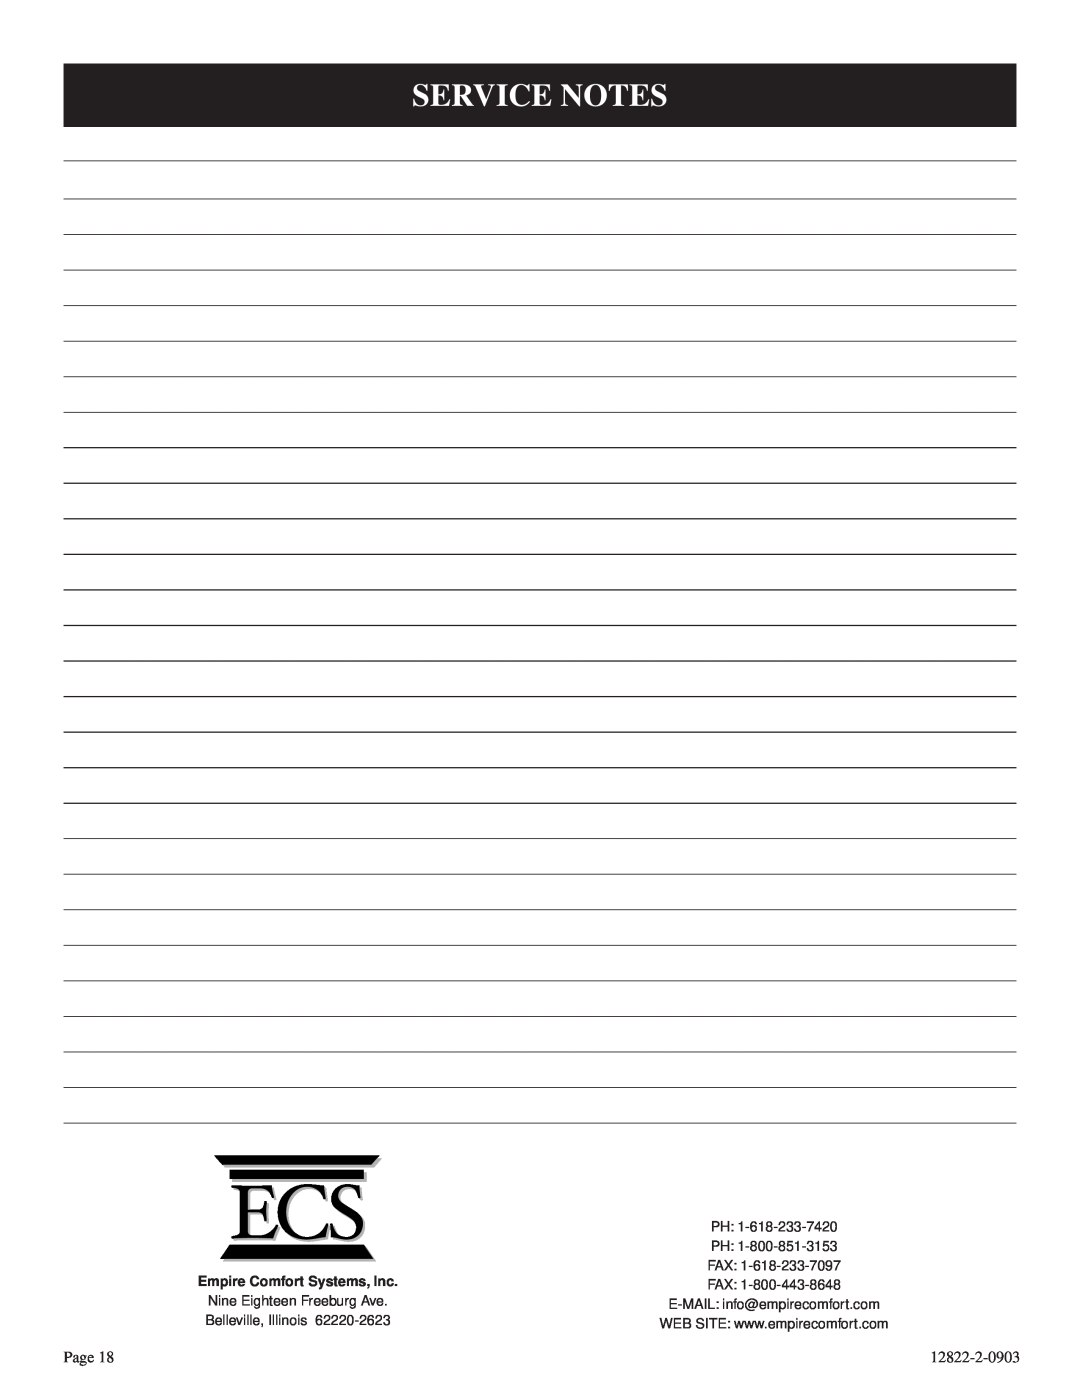 Empire Comfort Systems RH-50C-1 Service Notes, Page, 12822-2-0903, Belleville, Illinois, Empire Comfort Systems, Inc, Fax 